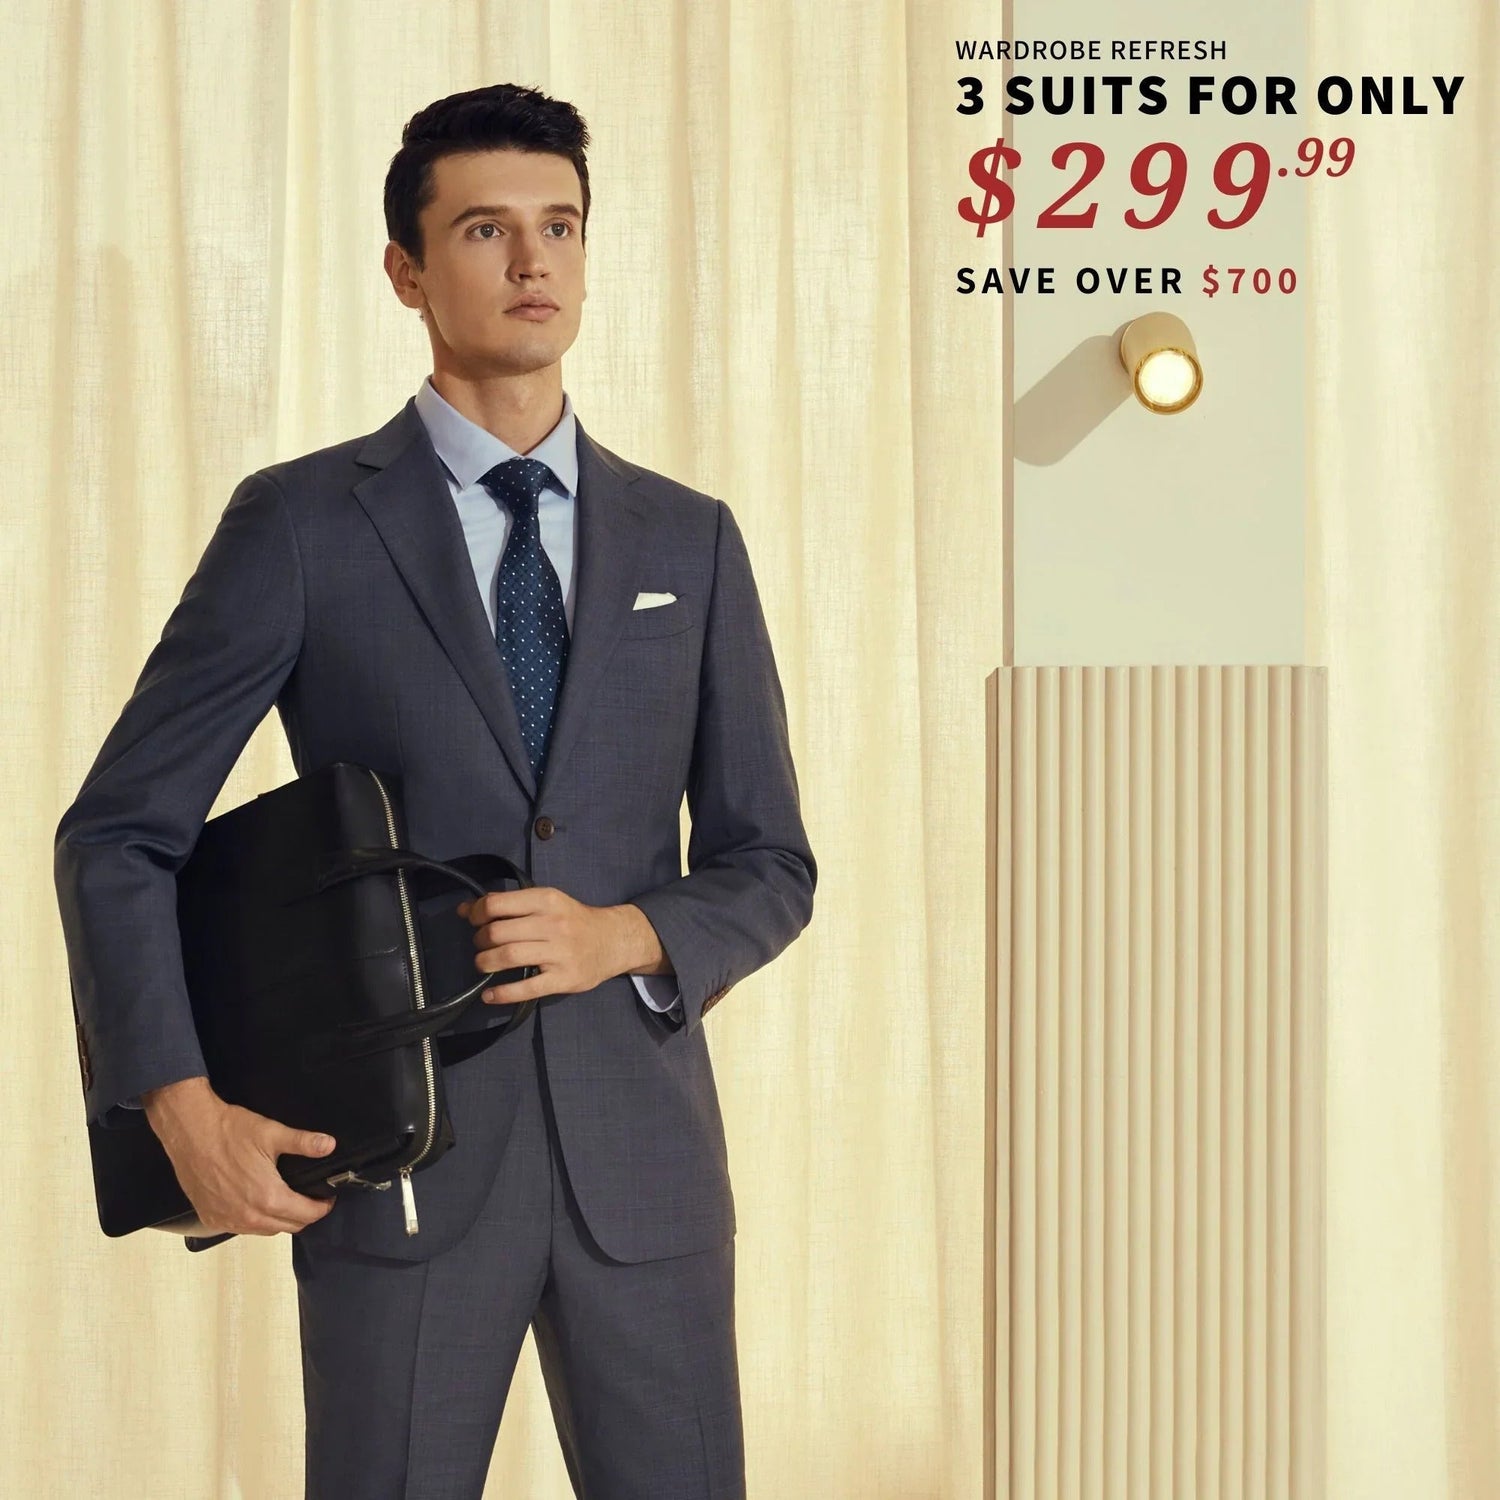 A man in a suit is holding a briefcase. He is wearing BYOB suits that are unhemmed which comes in the package of 3 Suits for $299.